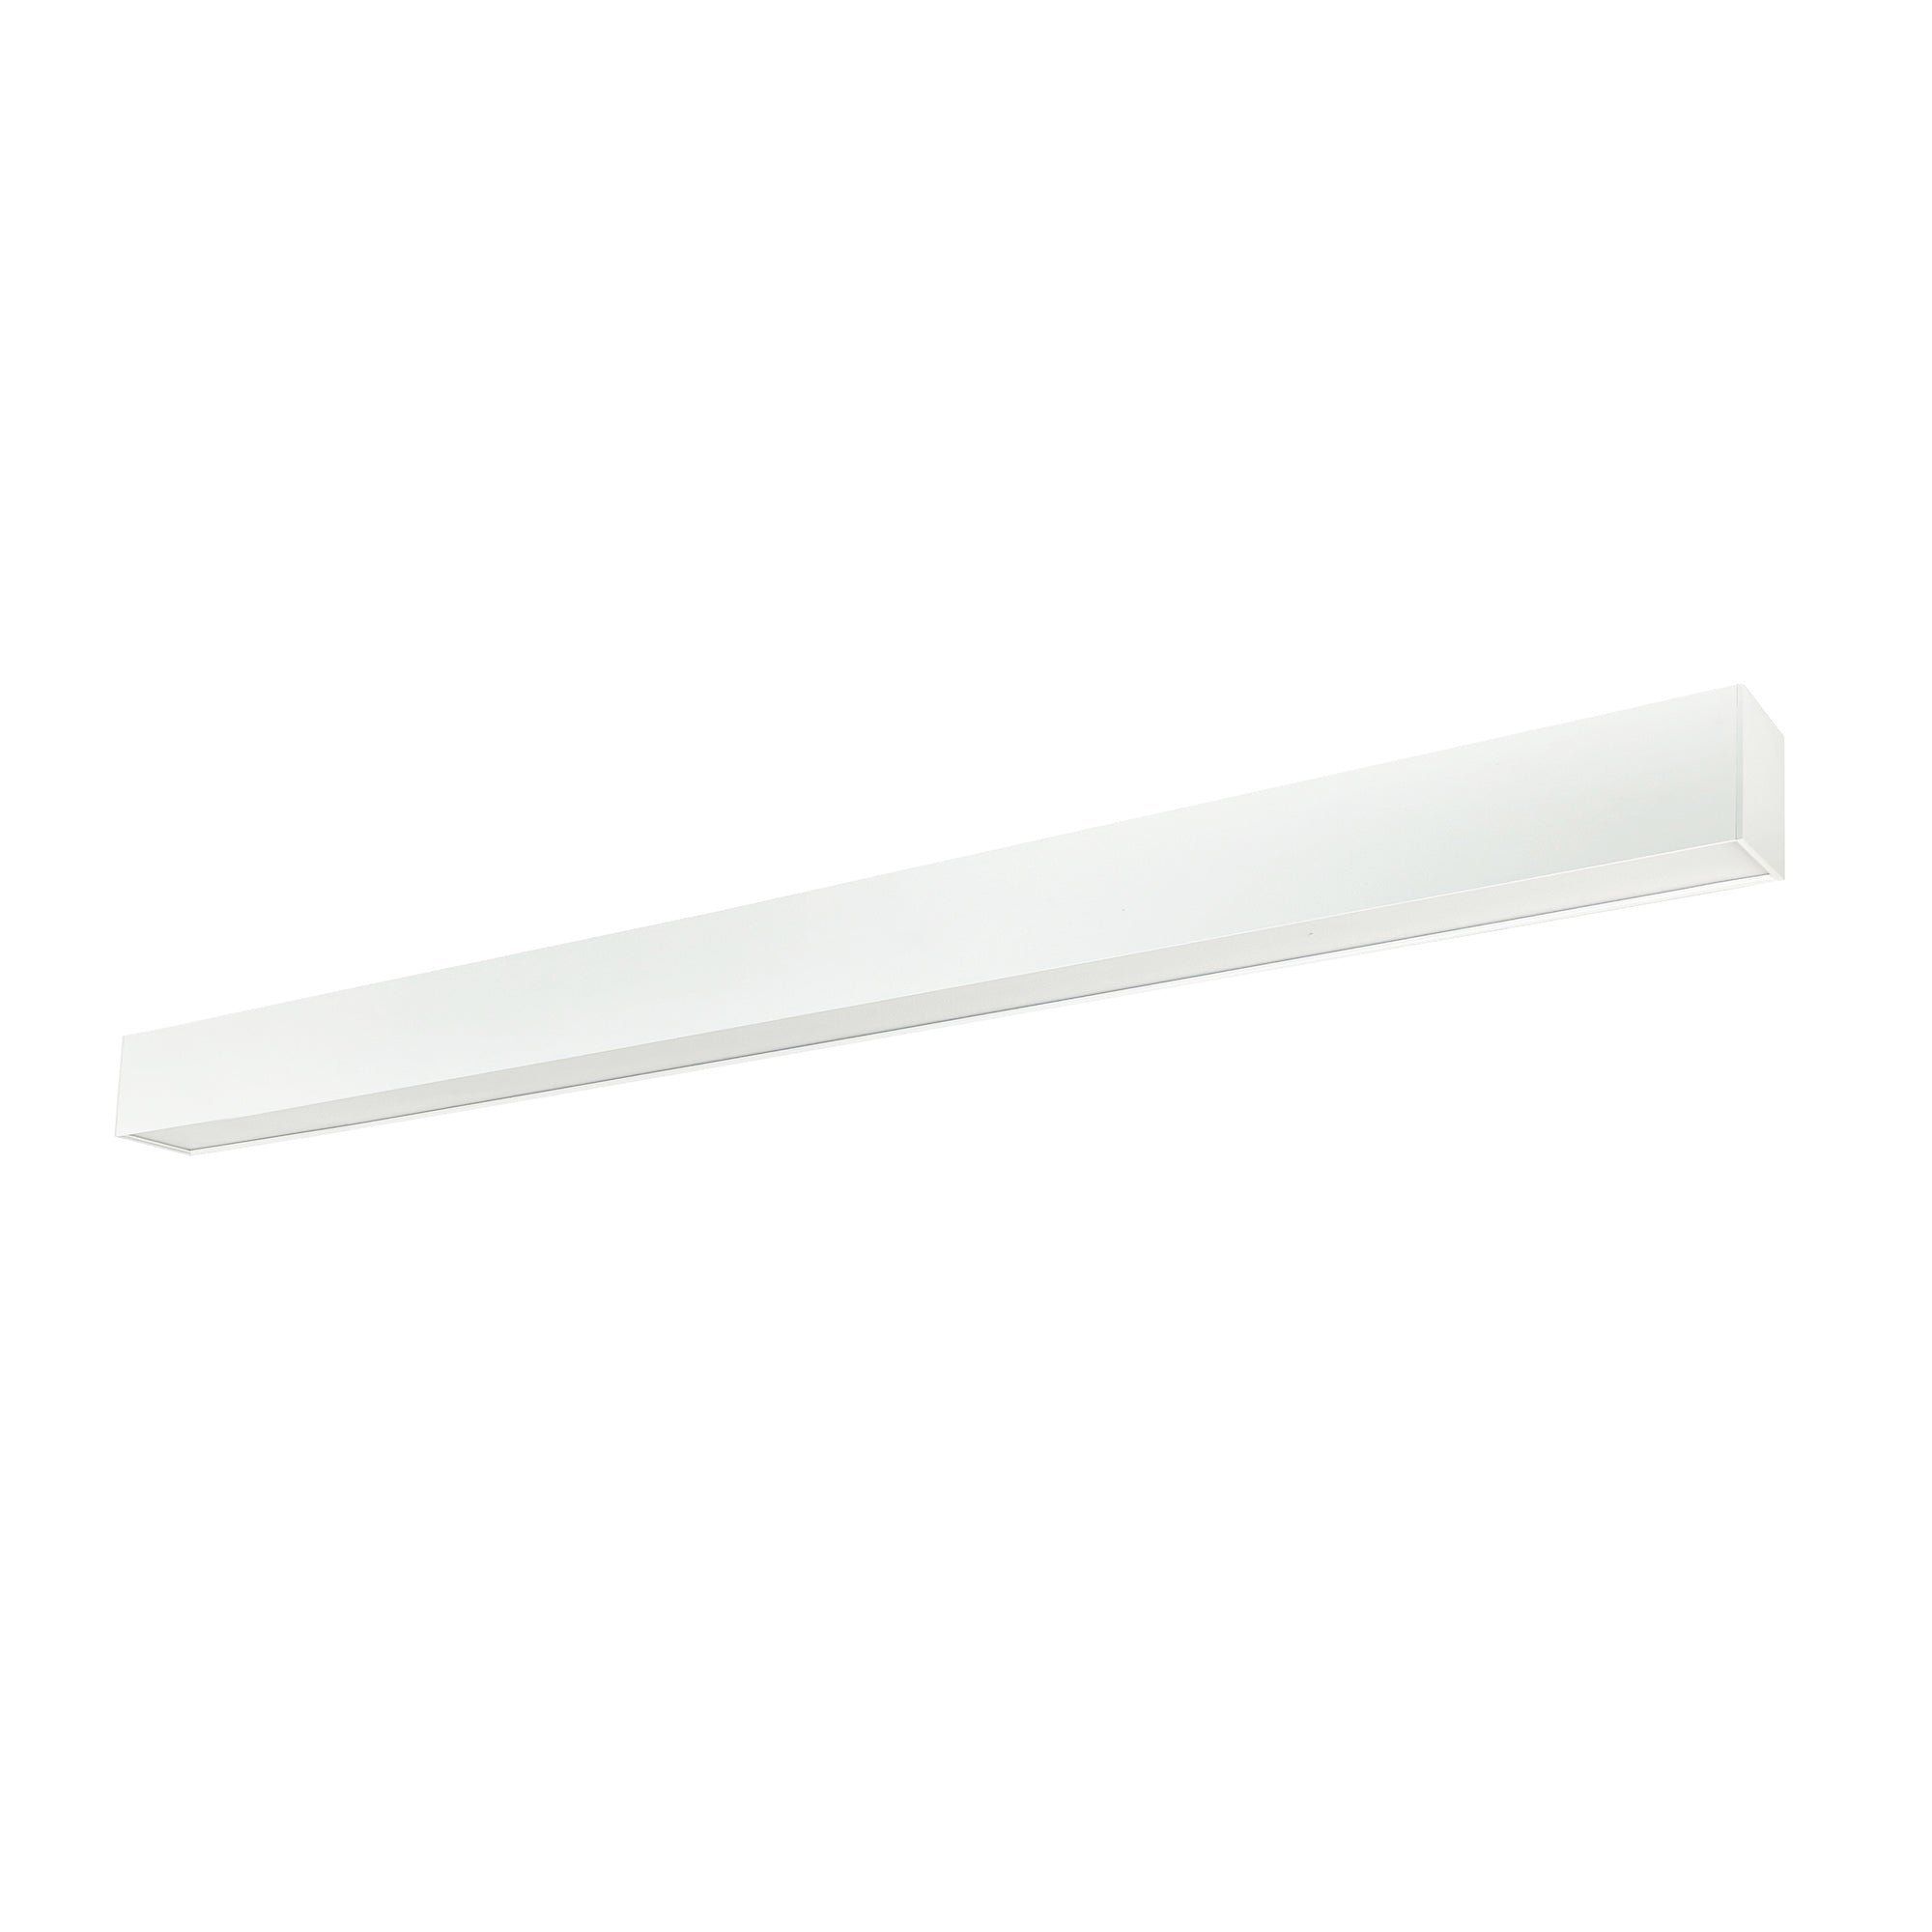 Nora Lighting NLUD-4334W/EM - Linear - 4' L-Line LED Indirect/Direct Linear, 6152lm / Selectable CCT, White Finish, with EM